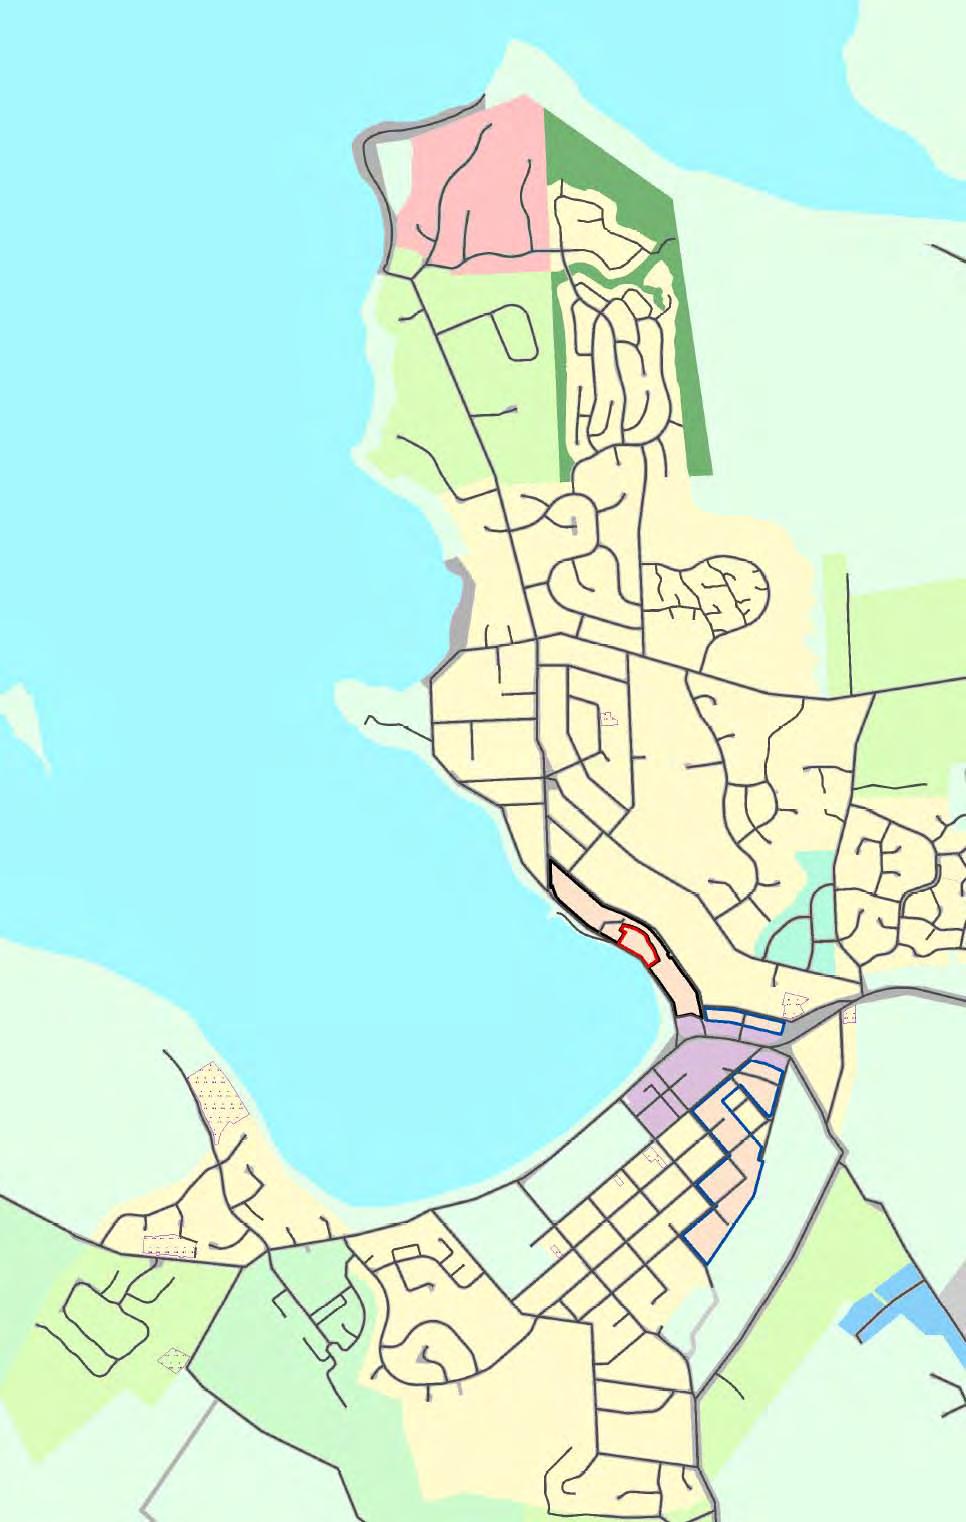 193 Appendix 2: The Wanaka Low Density Residential Zone and Corresponding